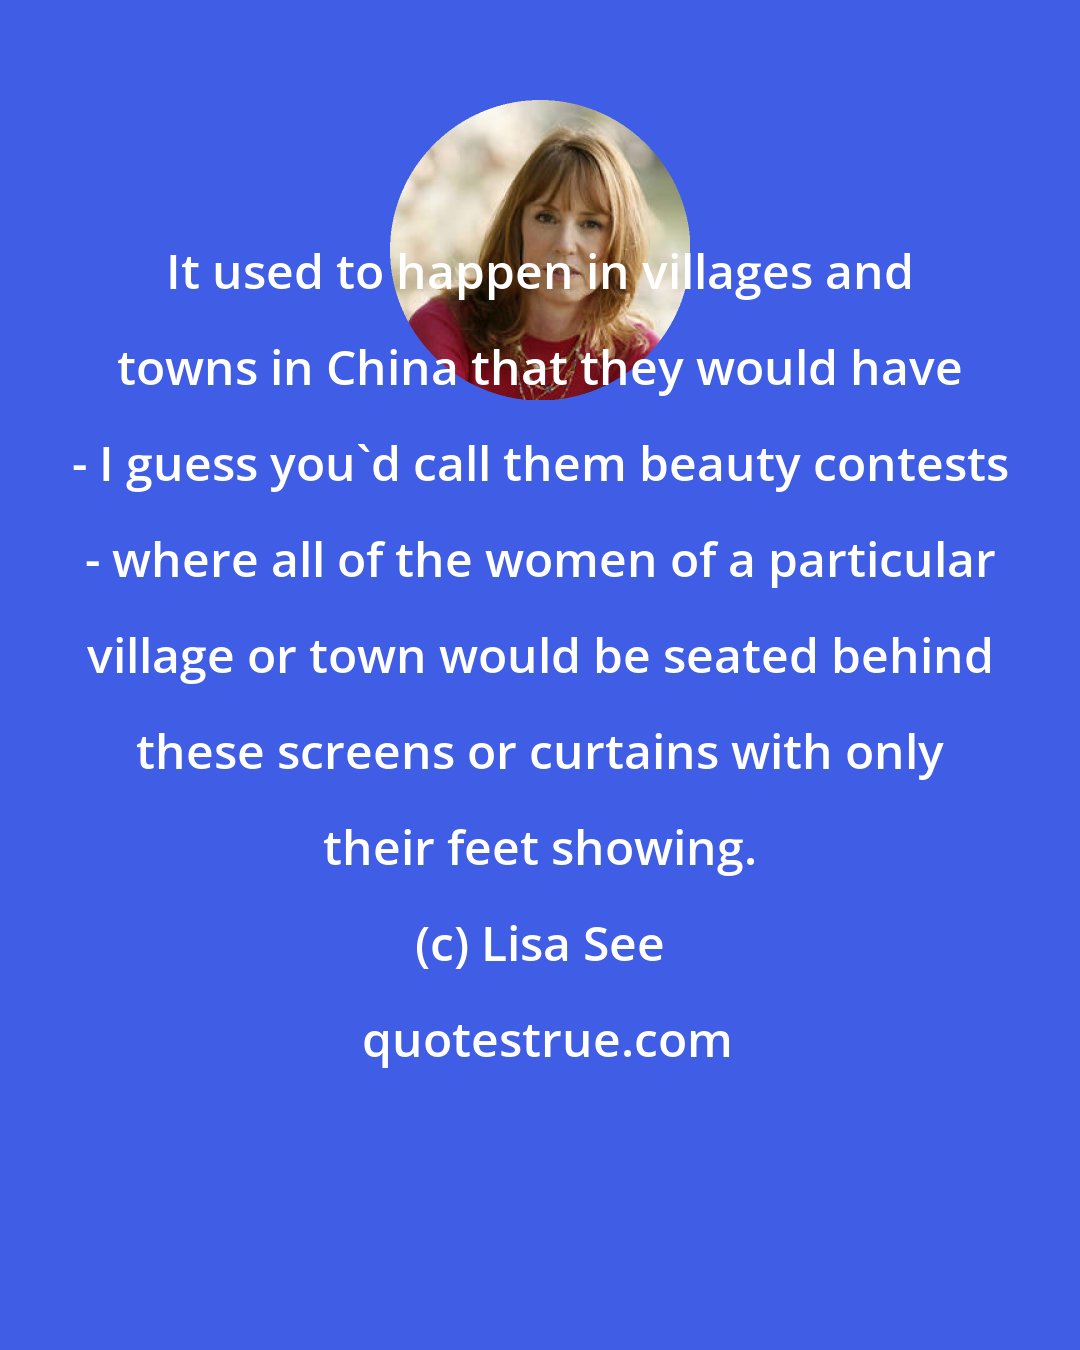 Lisa See: It used to happen in villages and towns in China that they would have - I guess you'd call them beauty contests - where all of the women of a particular village or town would be seated behind these screens or curtains with only their feet showing.